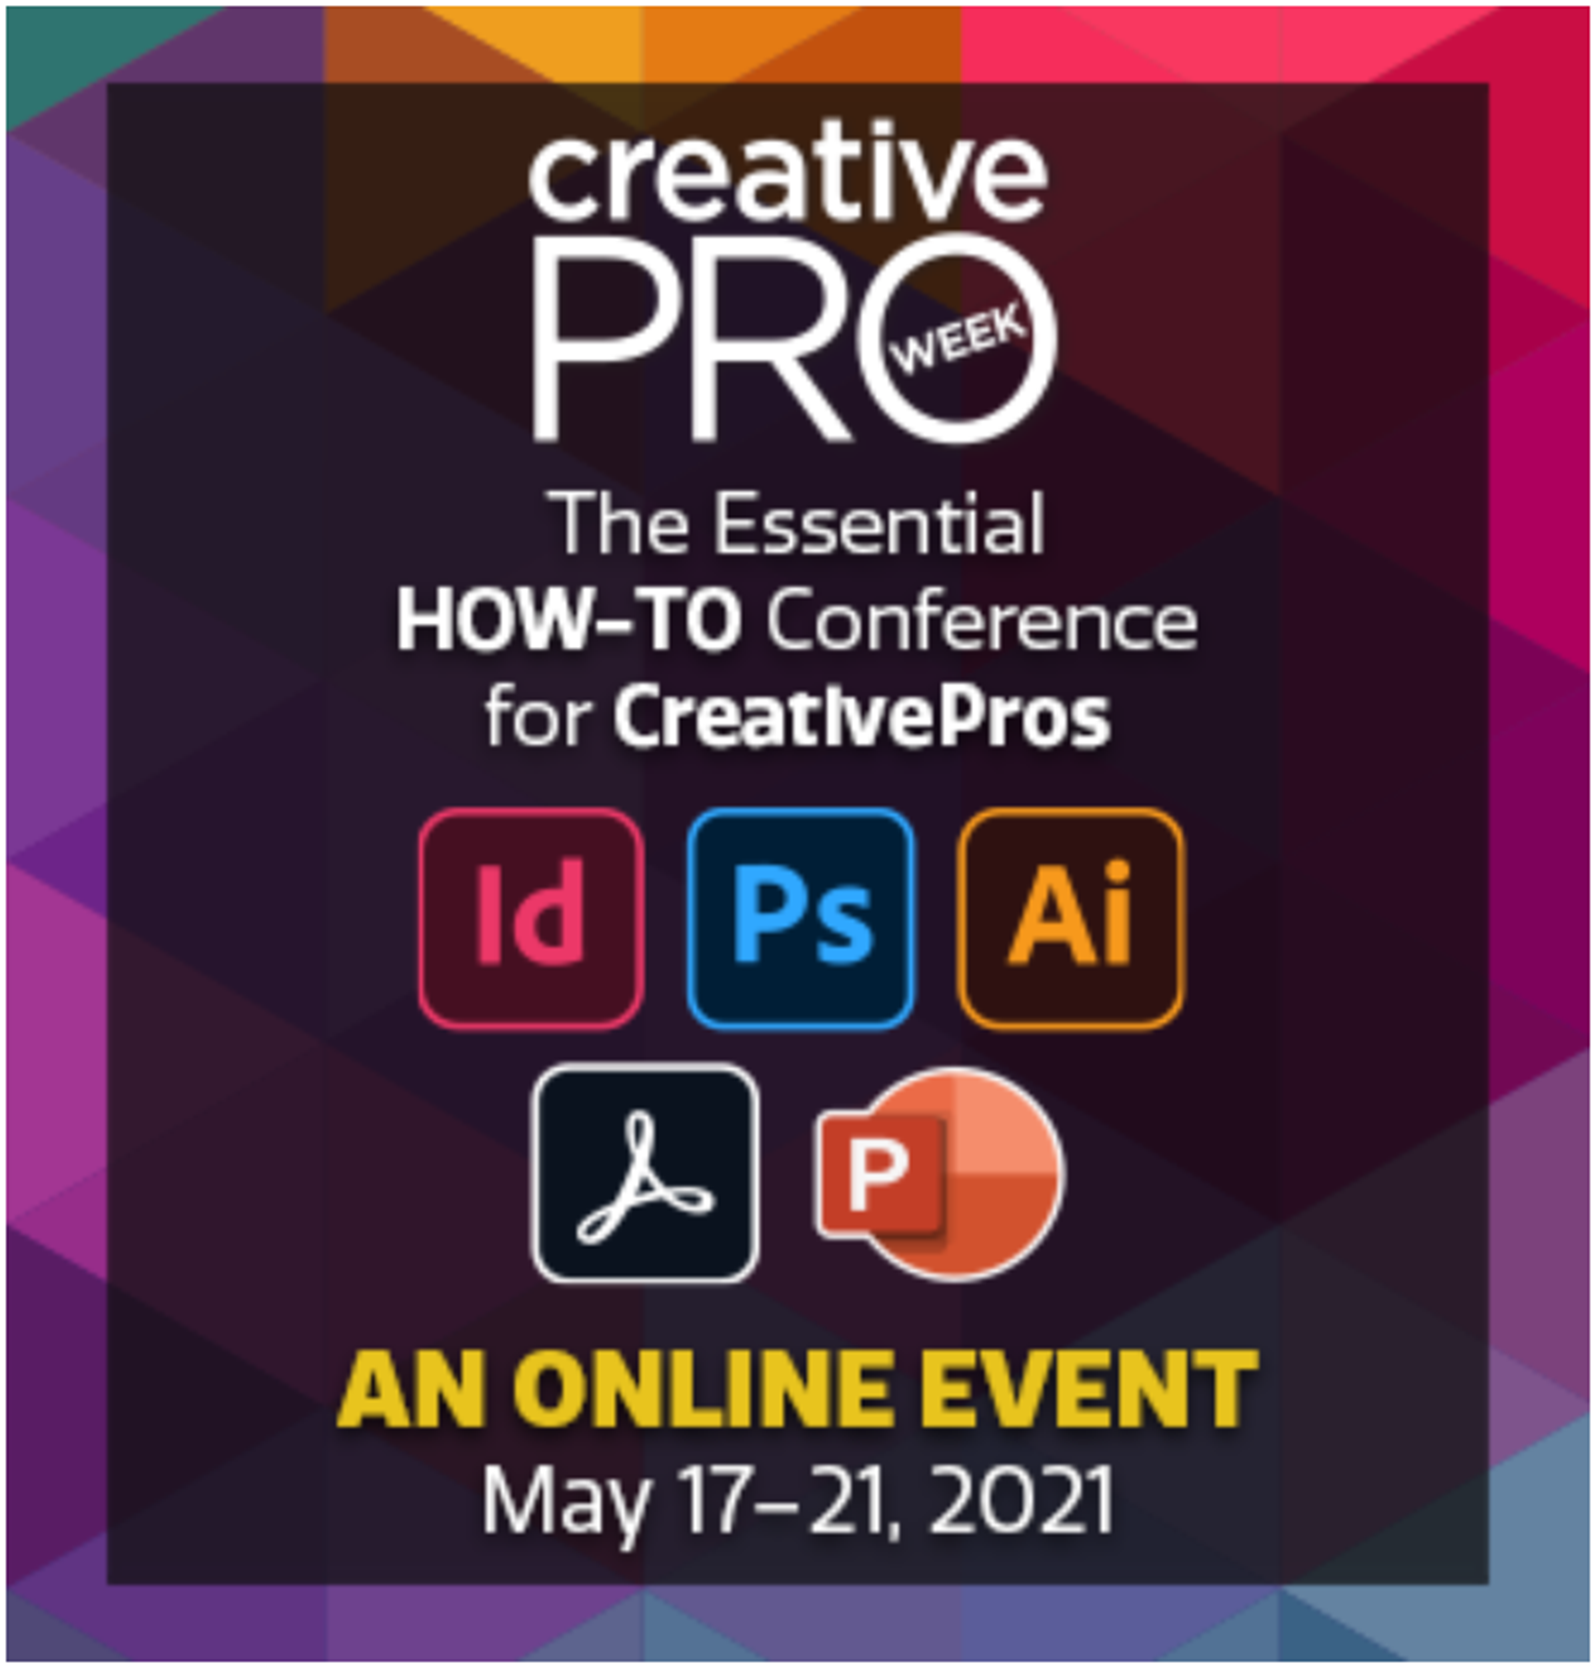 CreattivePro Week. The essential How-To Conference for creative Pros. InDesign, Photoshop, Illustrator, Acrobat, and PowerPoint. An online event, May 17 to 21, 2021.